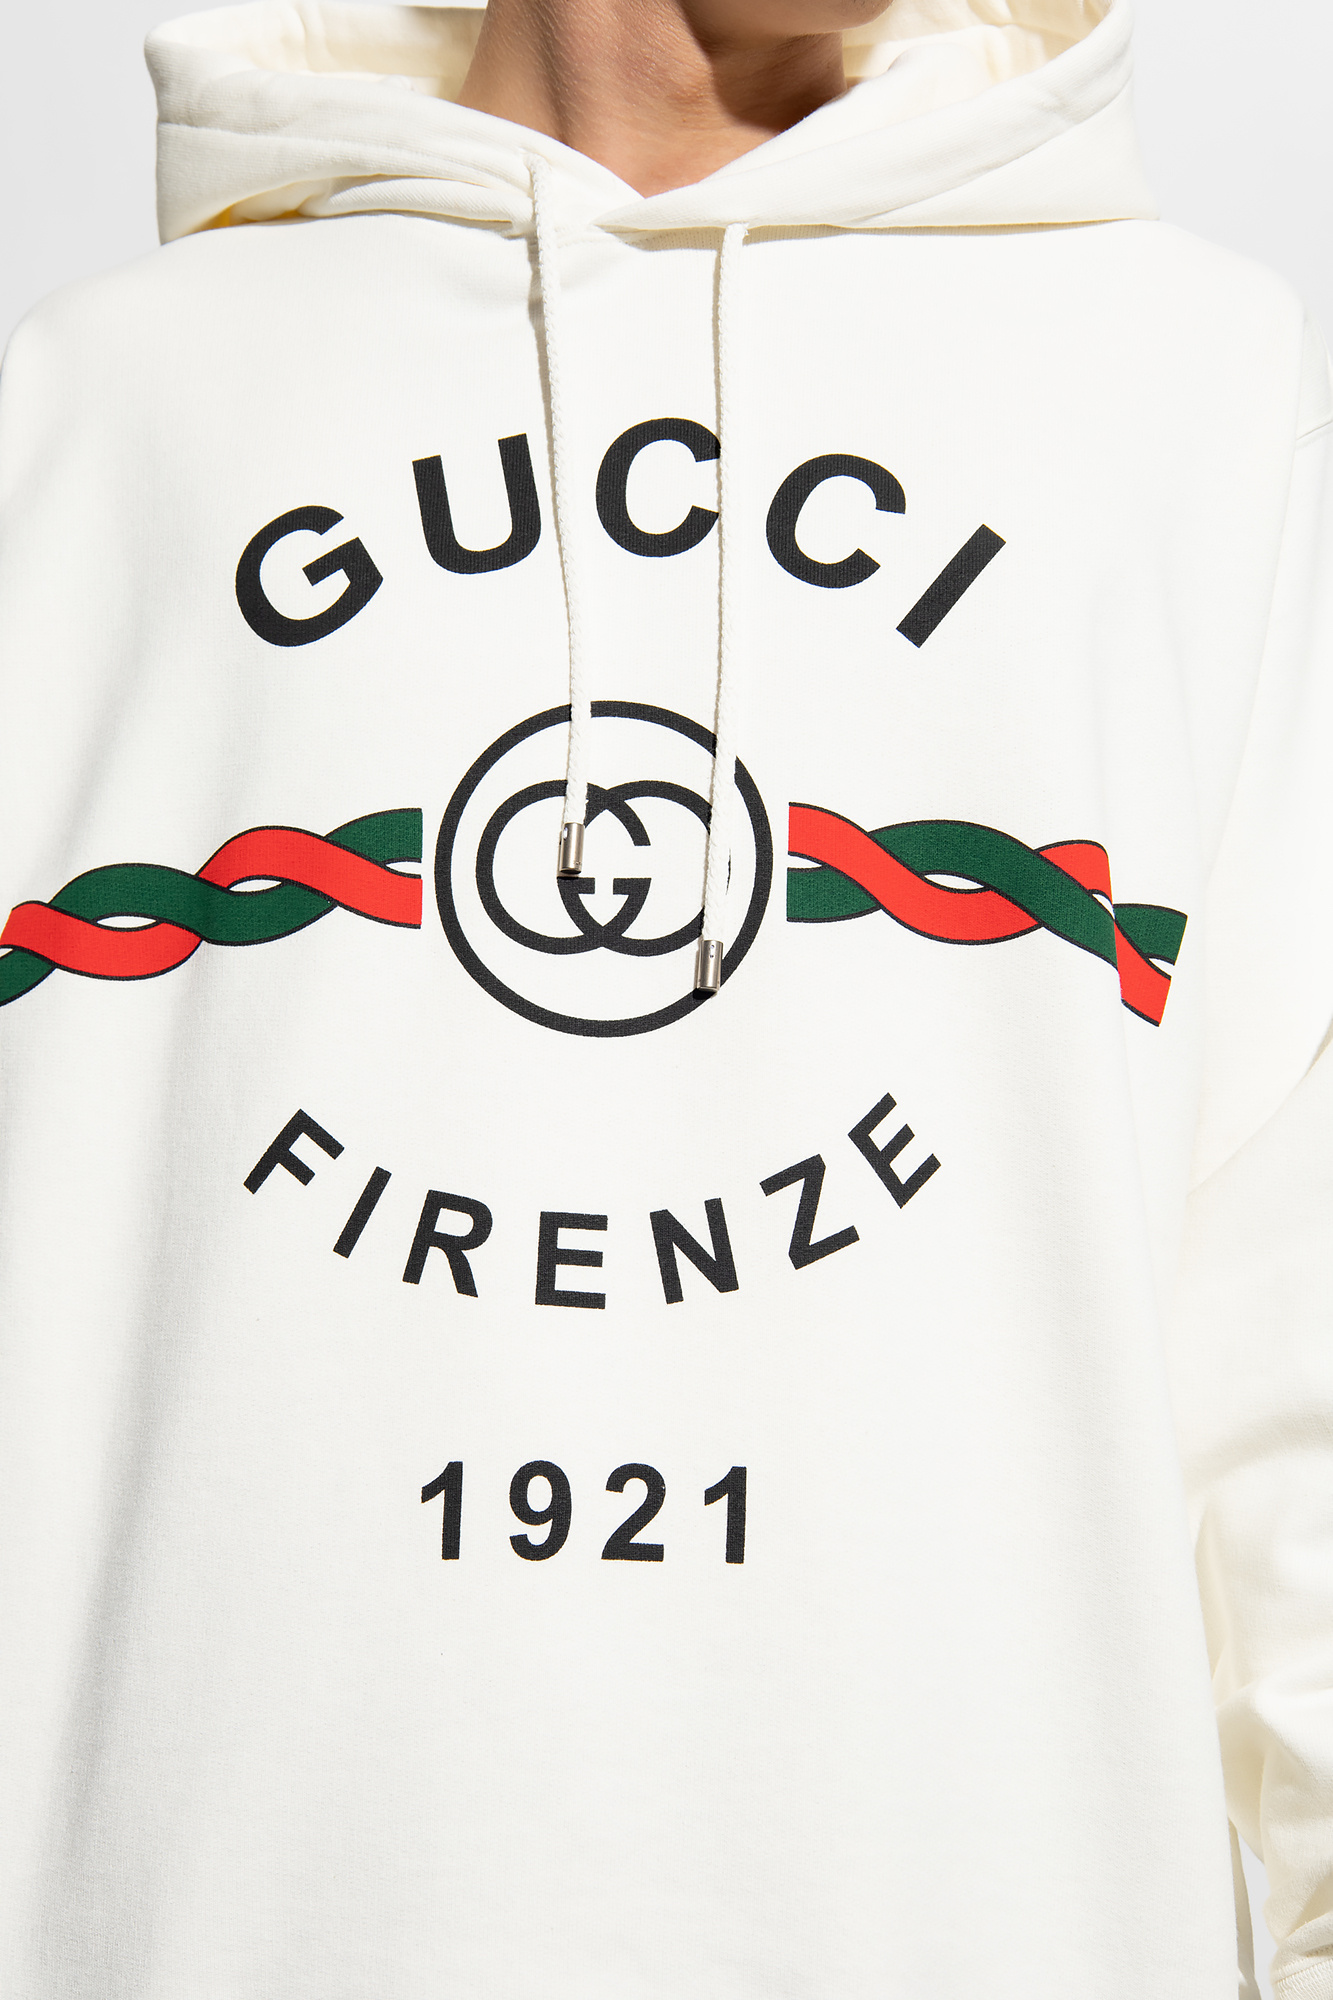 The bootleg trend of clothing at Gucci and Vetements